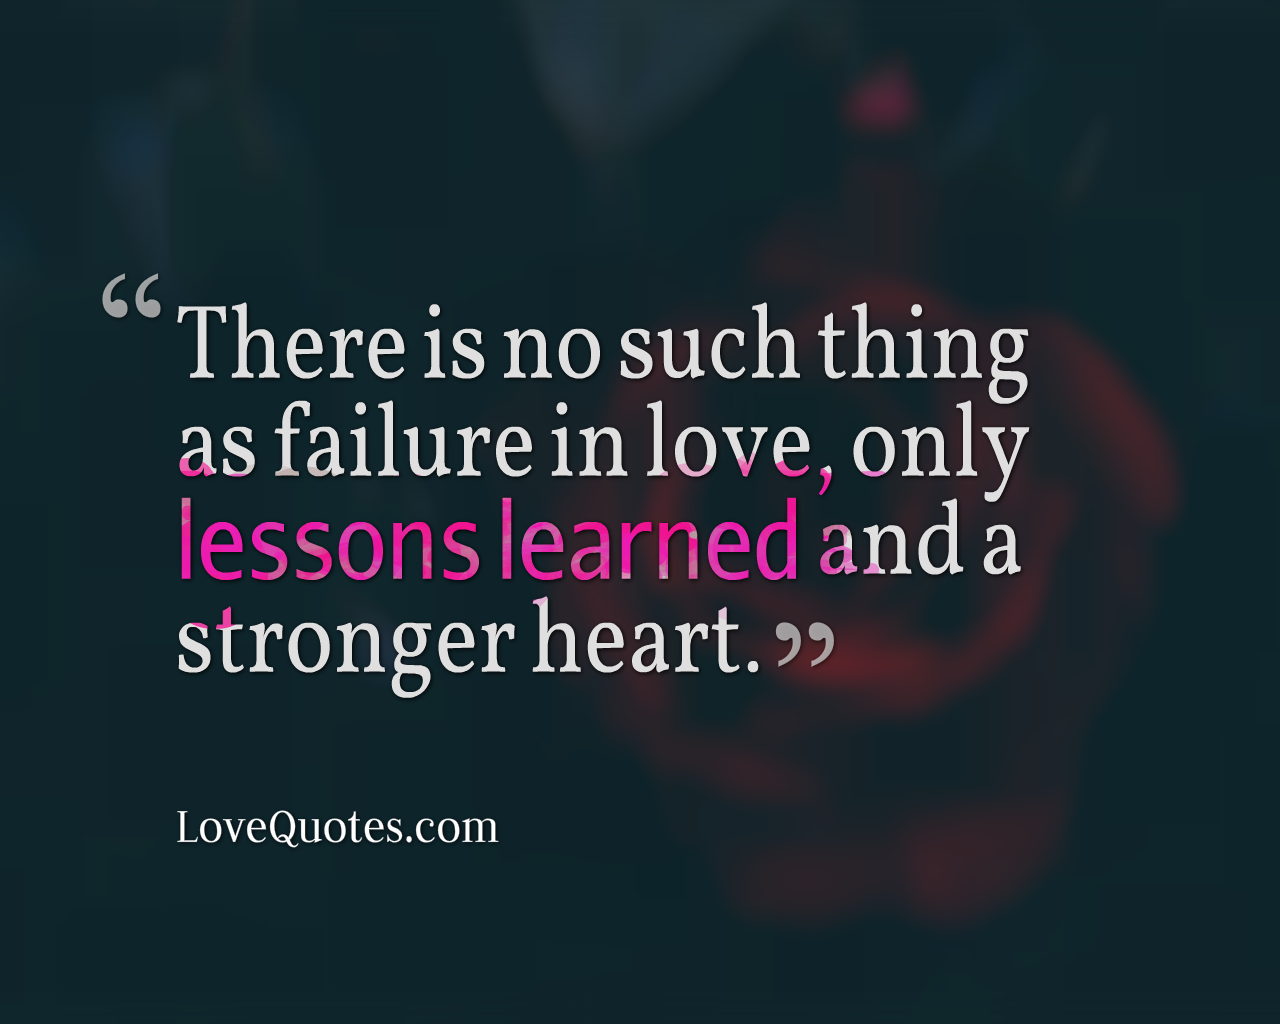 Only Lessons Learned